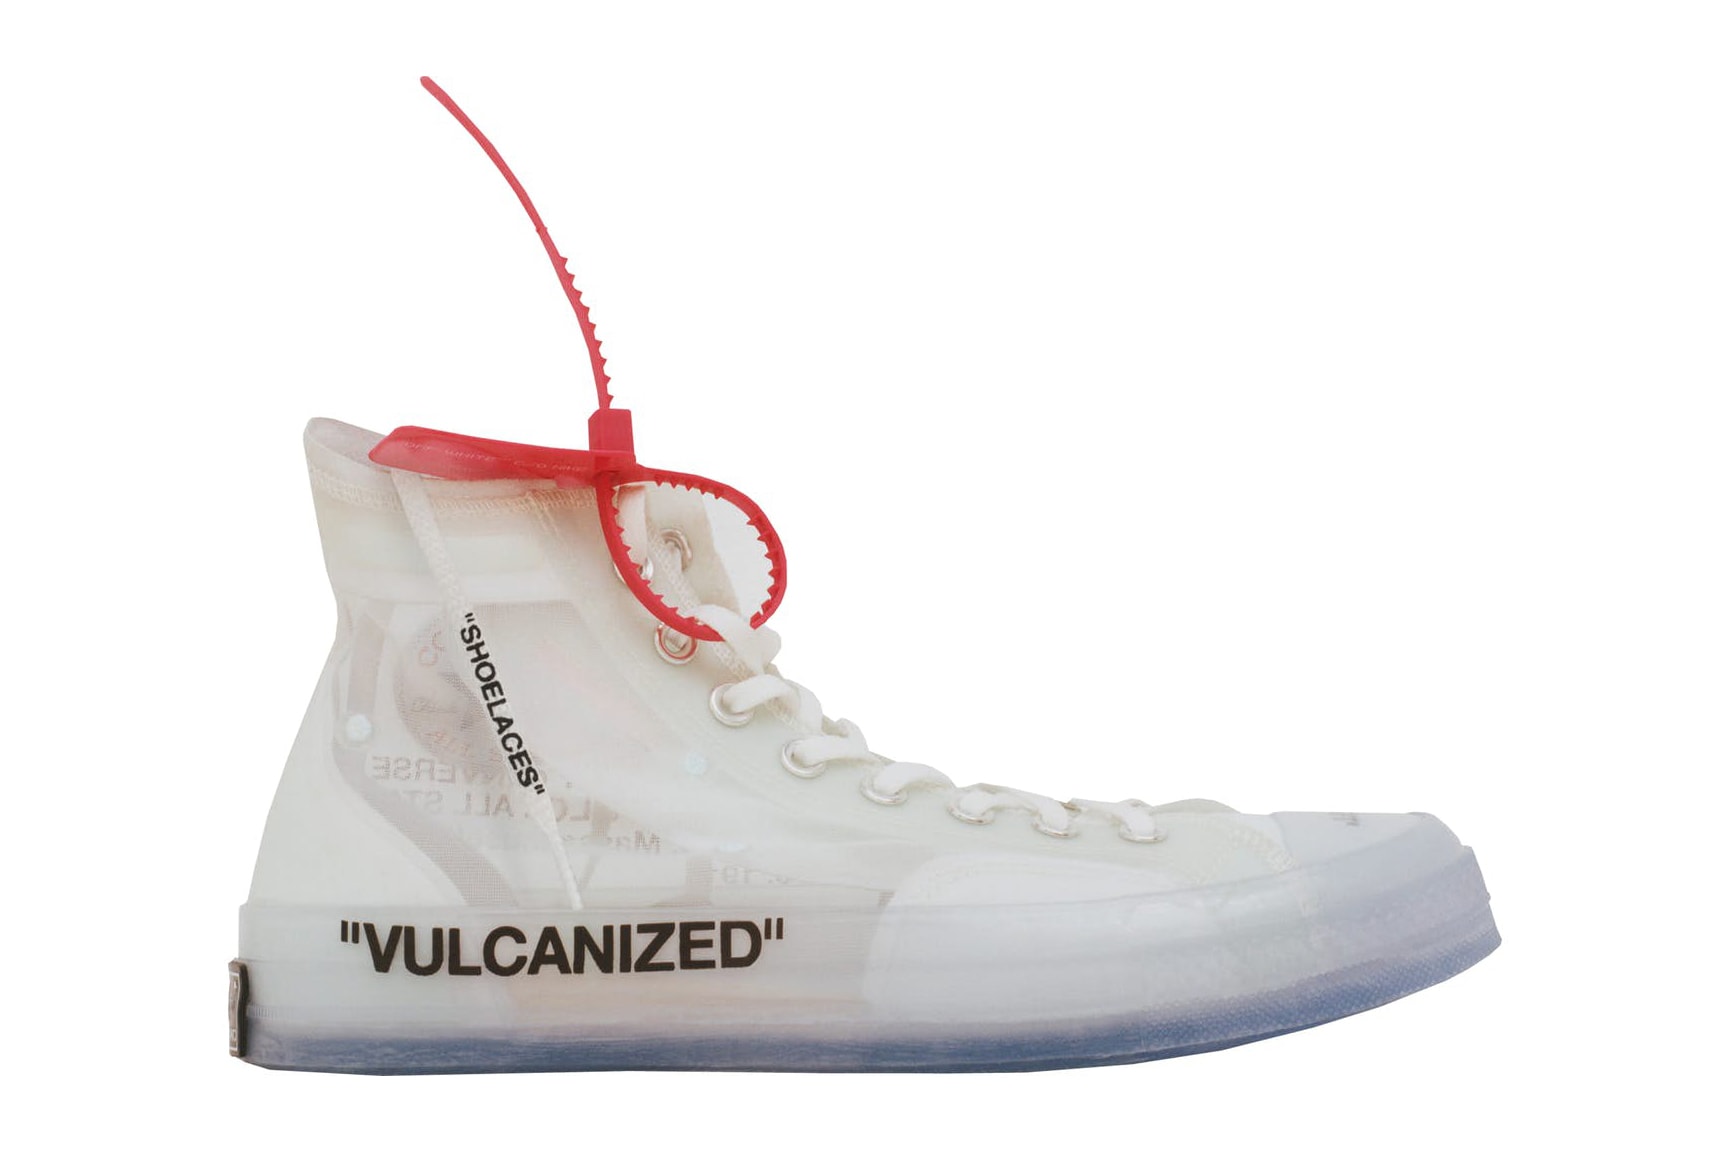 virgil abloh converse chuck taylor all star nike off white collaboration release date drop news april 6 2018 py_rates may 10 leaks news info vulcanized